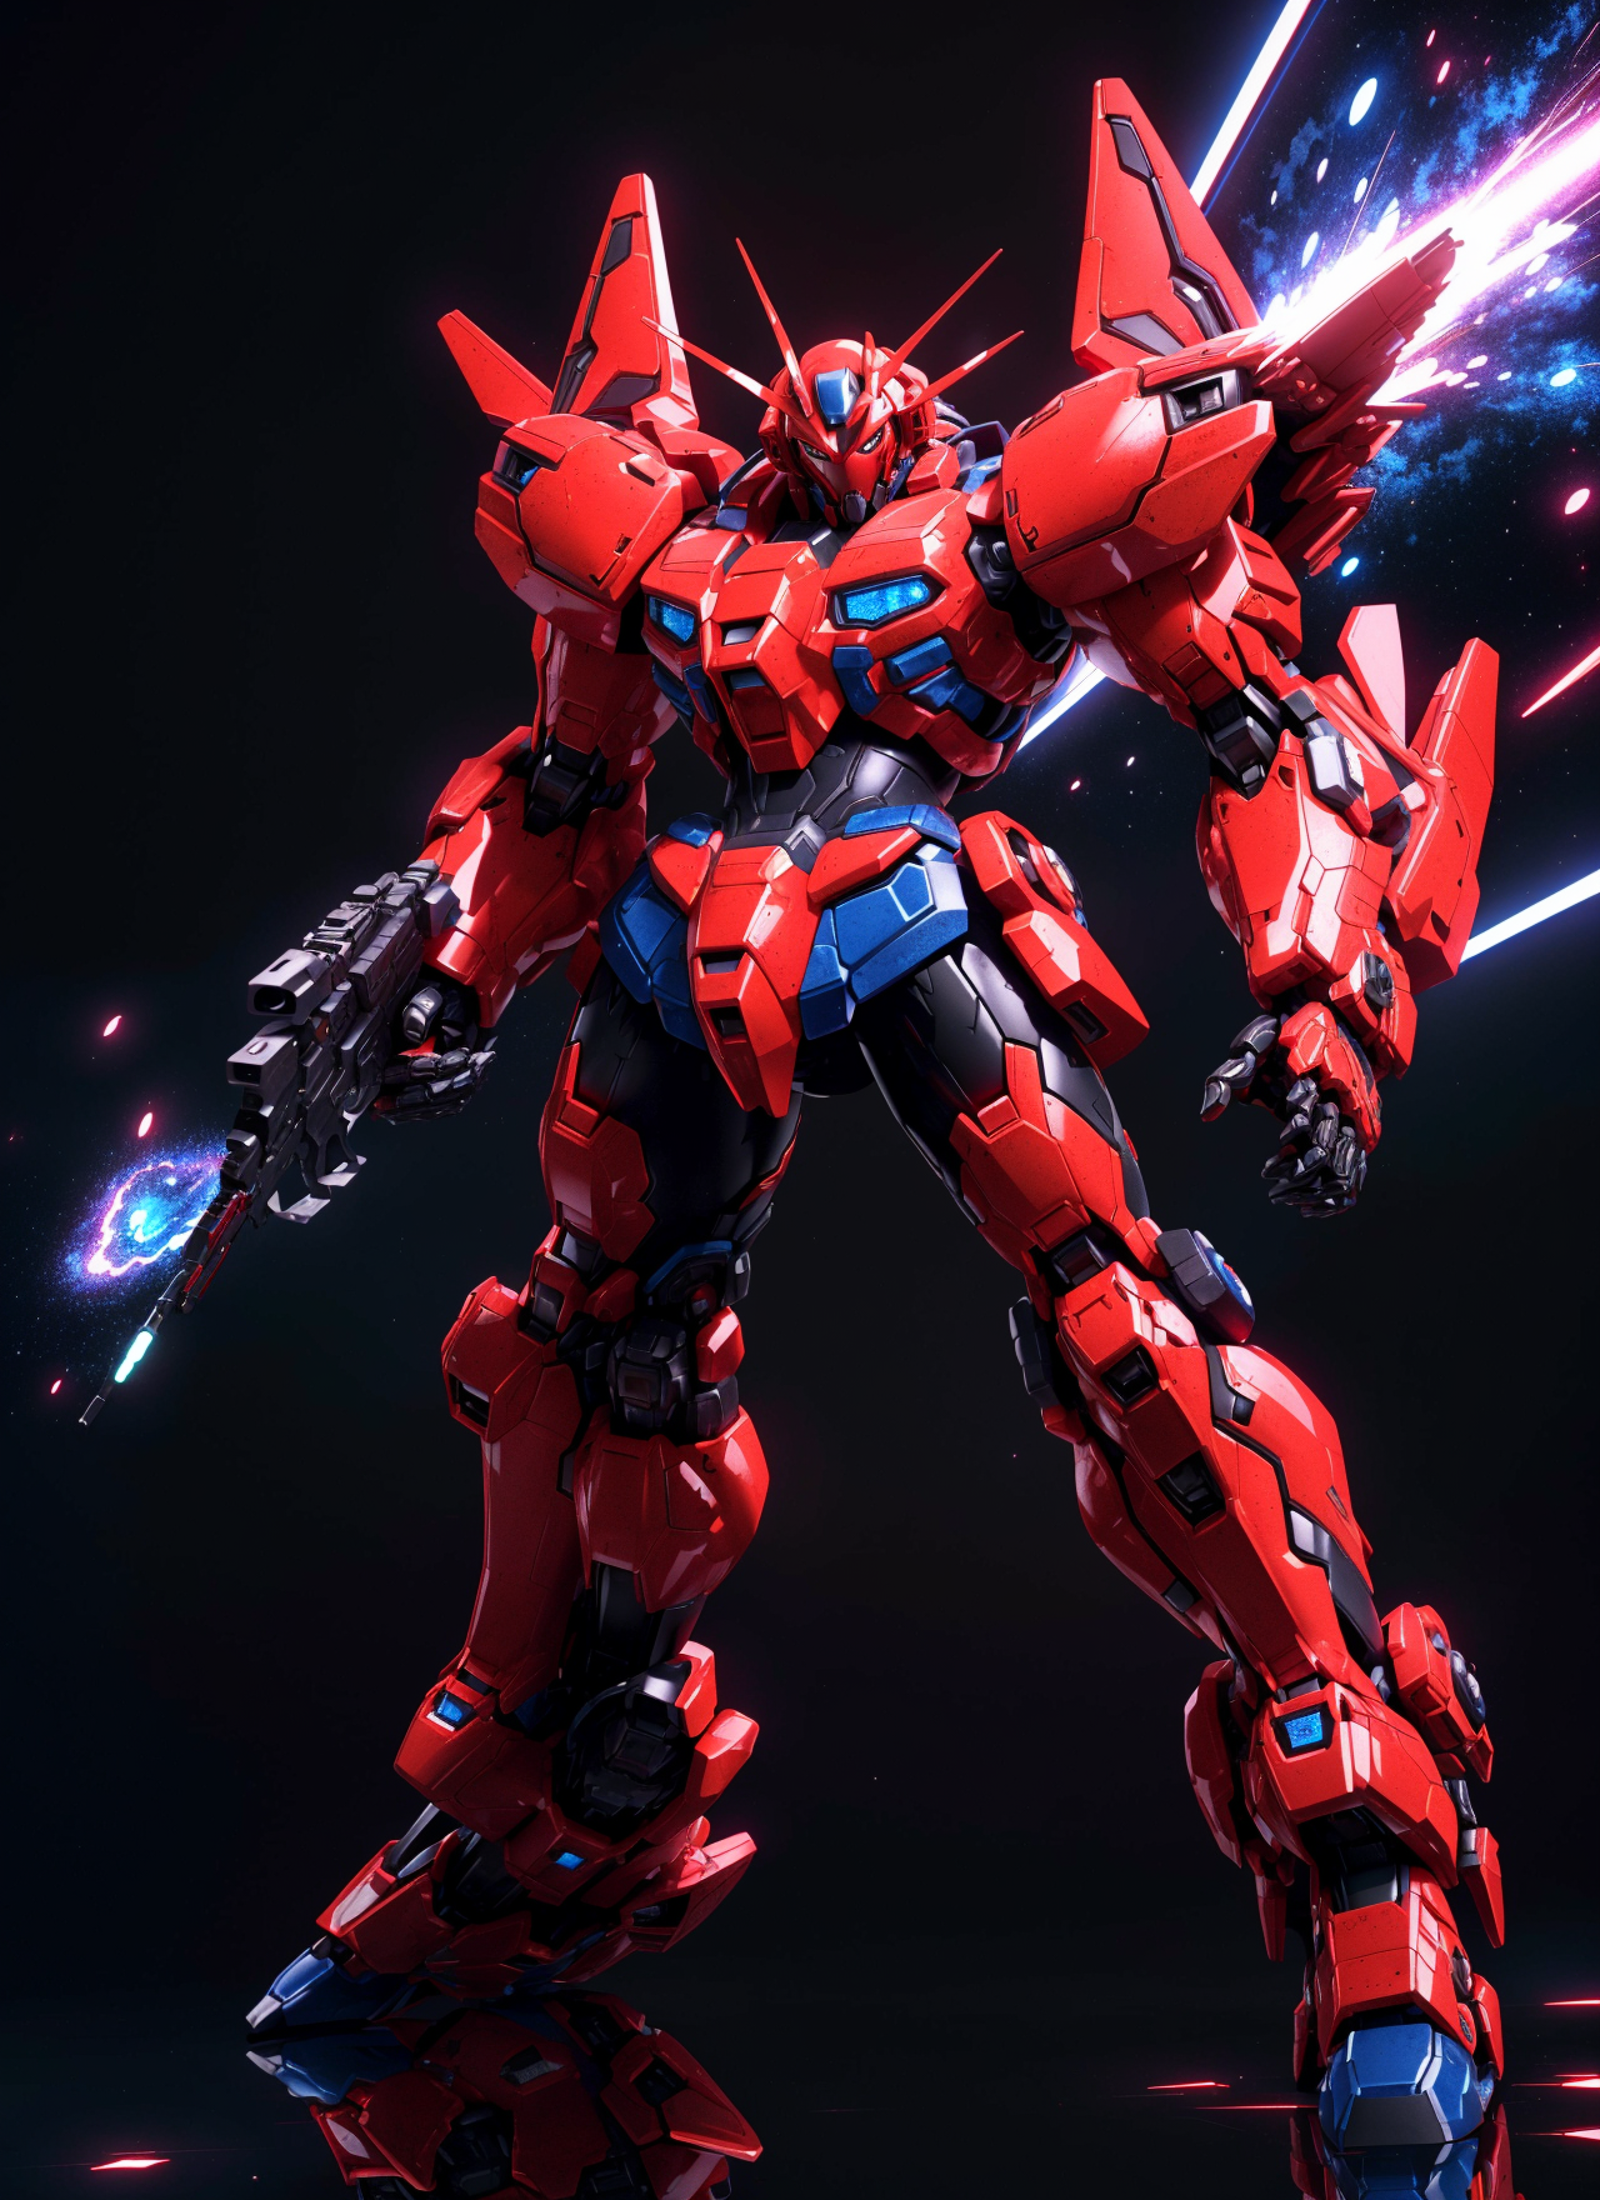 A red, black, and blue robot with a gun.